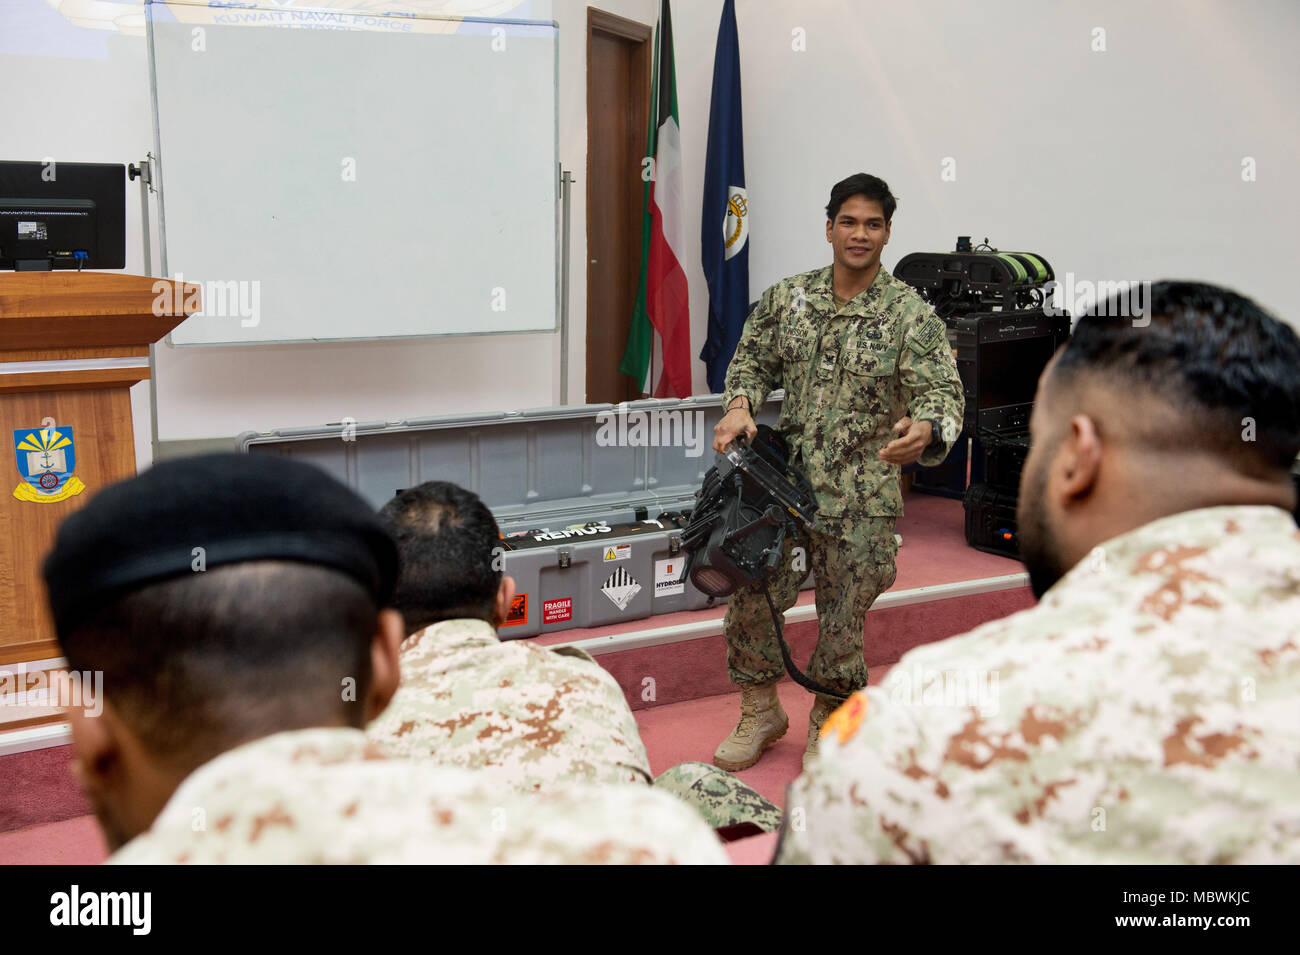 180107-N-XE158-0078 Mohammed Al-Ahmad Naval Base, KUWAIT (Jan. 7, 2018) Explosive Ordnance Disposal Technician 2nd Class Veranio-Xavier Tongson, assigned to Commander, Task Group 56.1, explains the capabilities of an underwater navigation system to Kuwait Naval Force explosive ordnance disposal technicians during a training evolution as part of exercise Eager Response 18. Eager Response 18 is a bilateral explosive ordnance disposal military exercise between the State of Kuwait and the United States. The exercise fortifies military-to-military relationships between the Kuwait Naval Force and U. Stock Photo